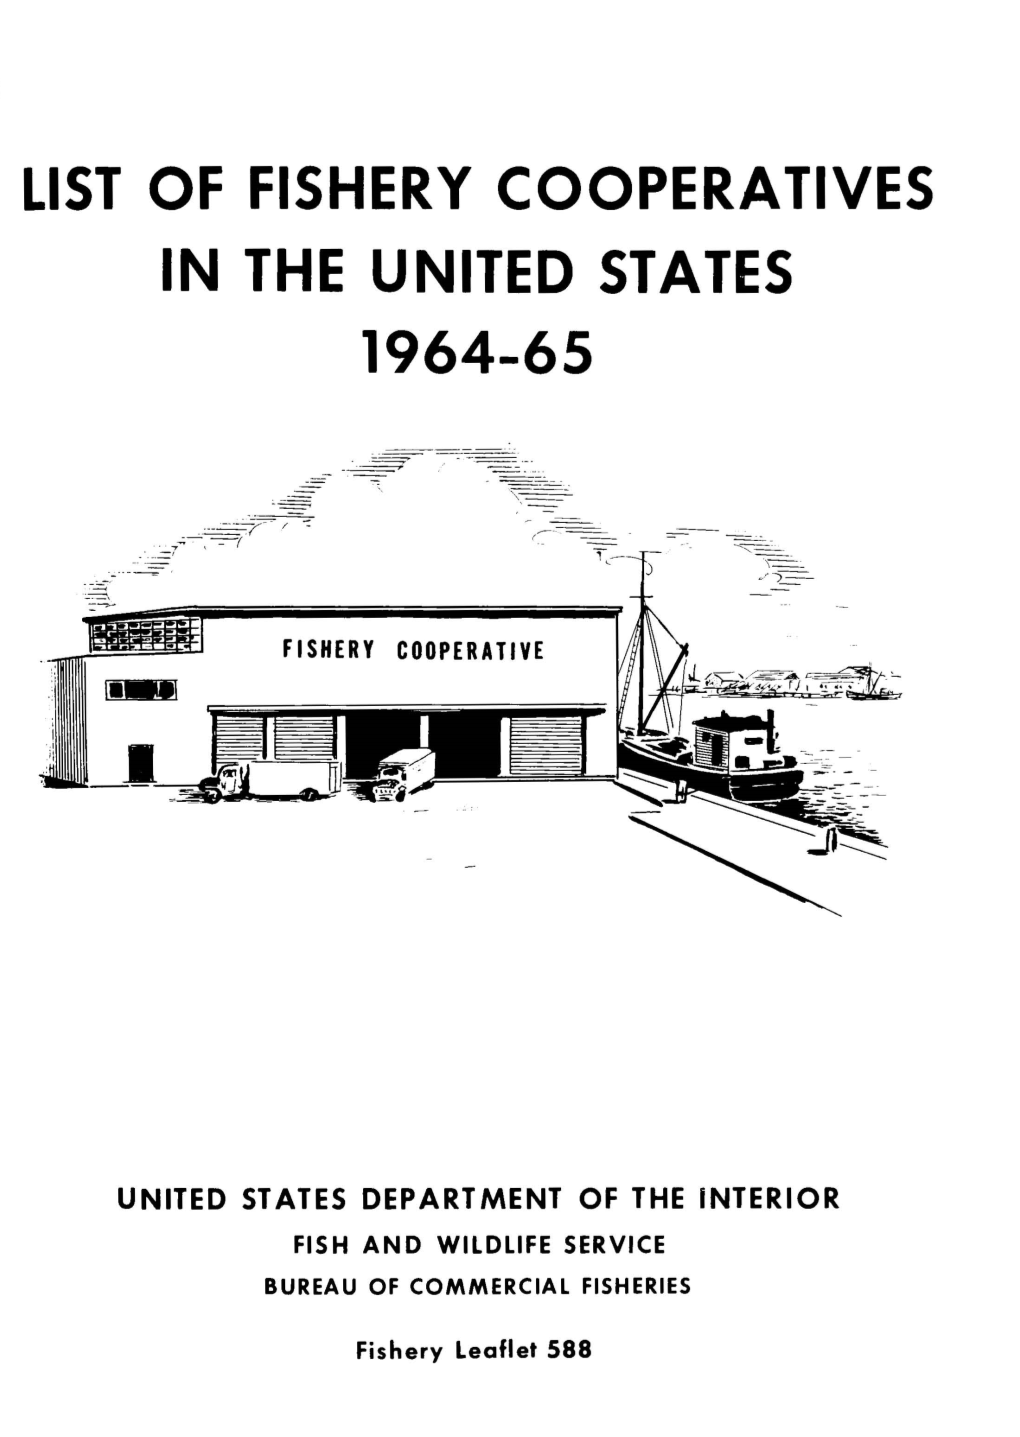 List of Fishery Cooperatives in the United States 1964-65